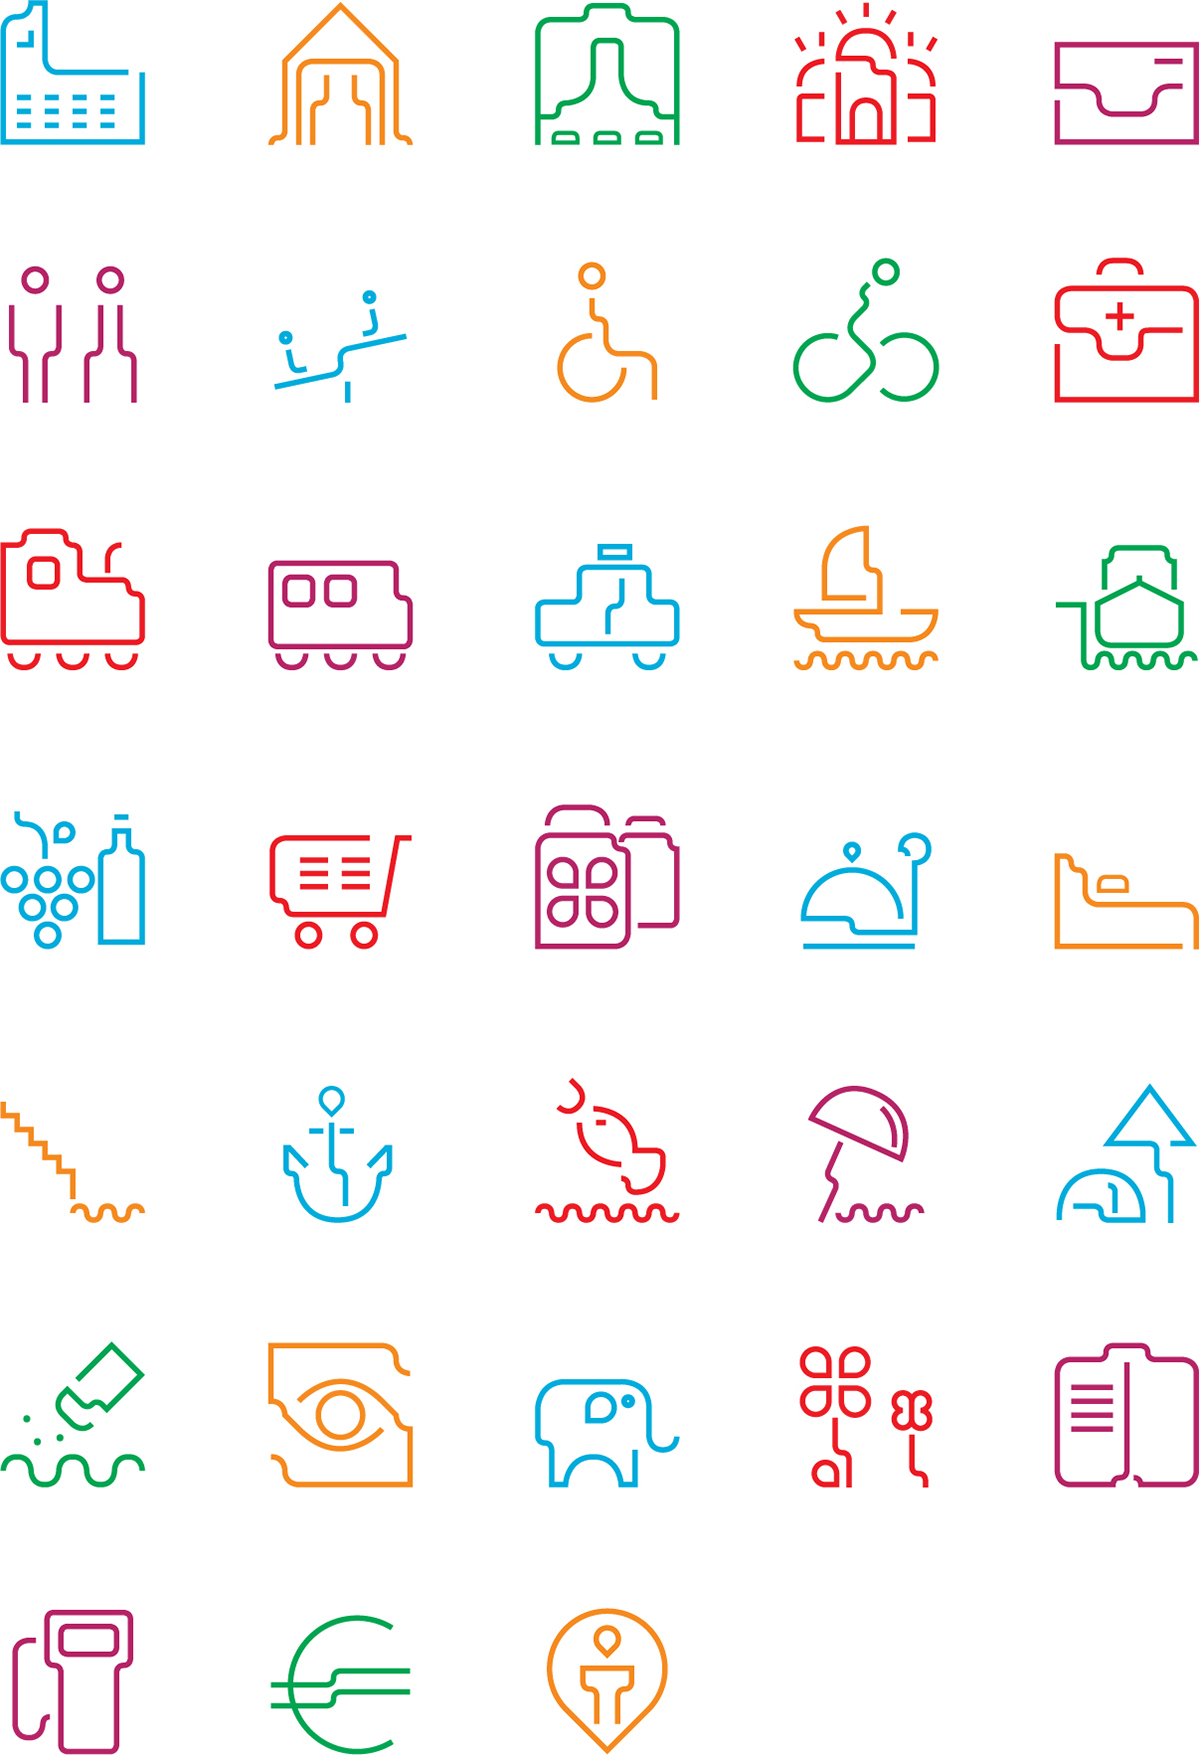 icons pictograms city pharmacy beach fishing cityhall library groceries mall bus taxi train boat toilet